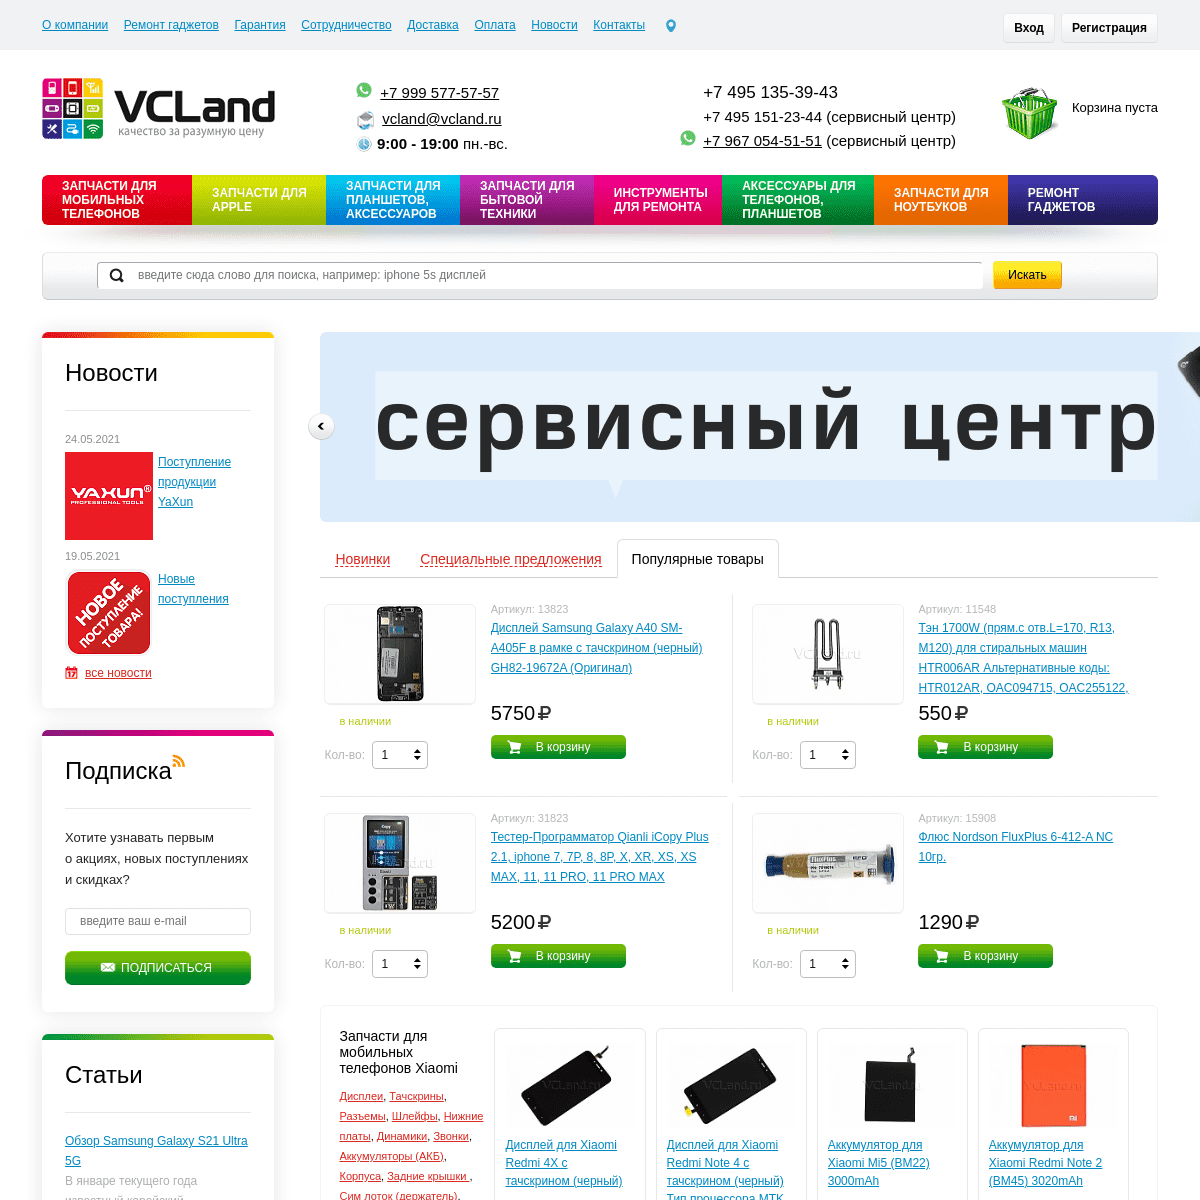 A complete backup of https://vcland.ru